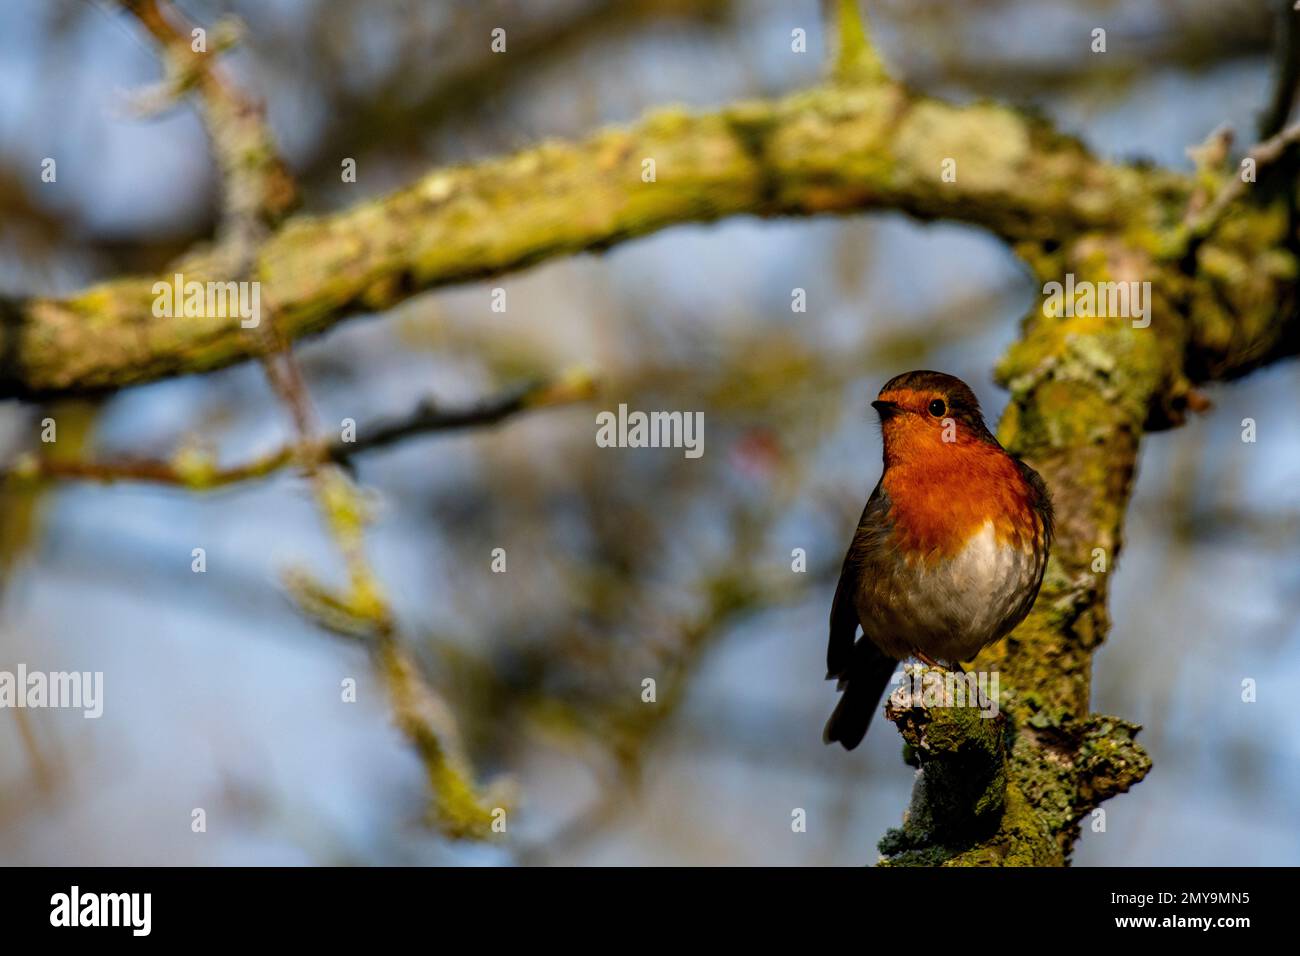 A robin red breast on a branch in a London park Stock Photo